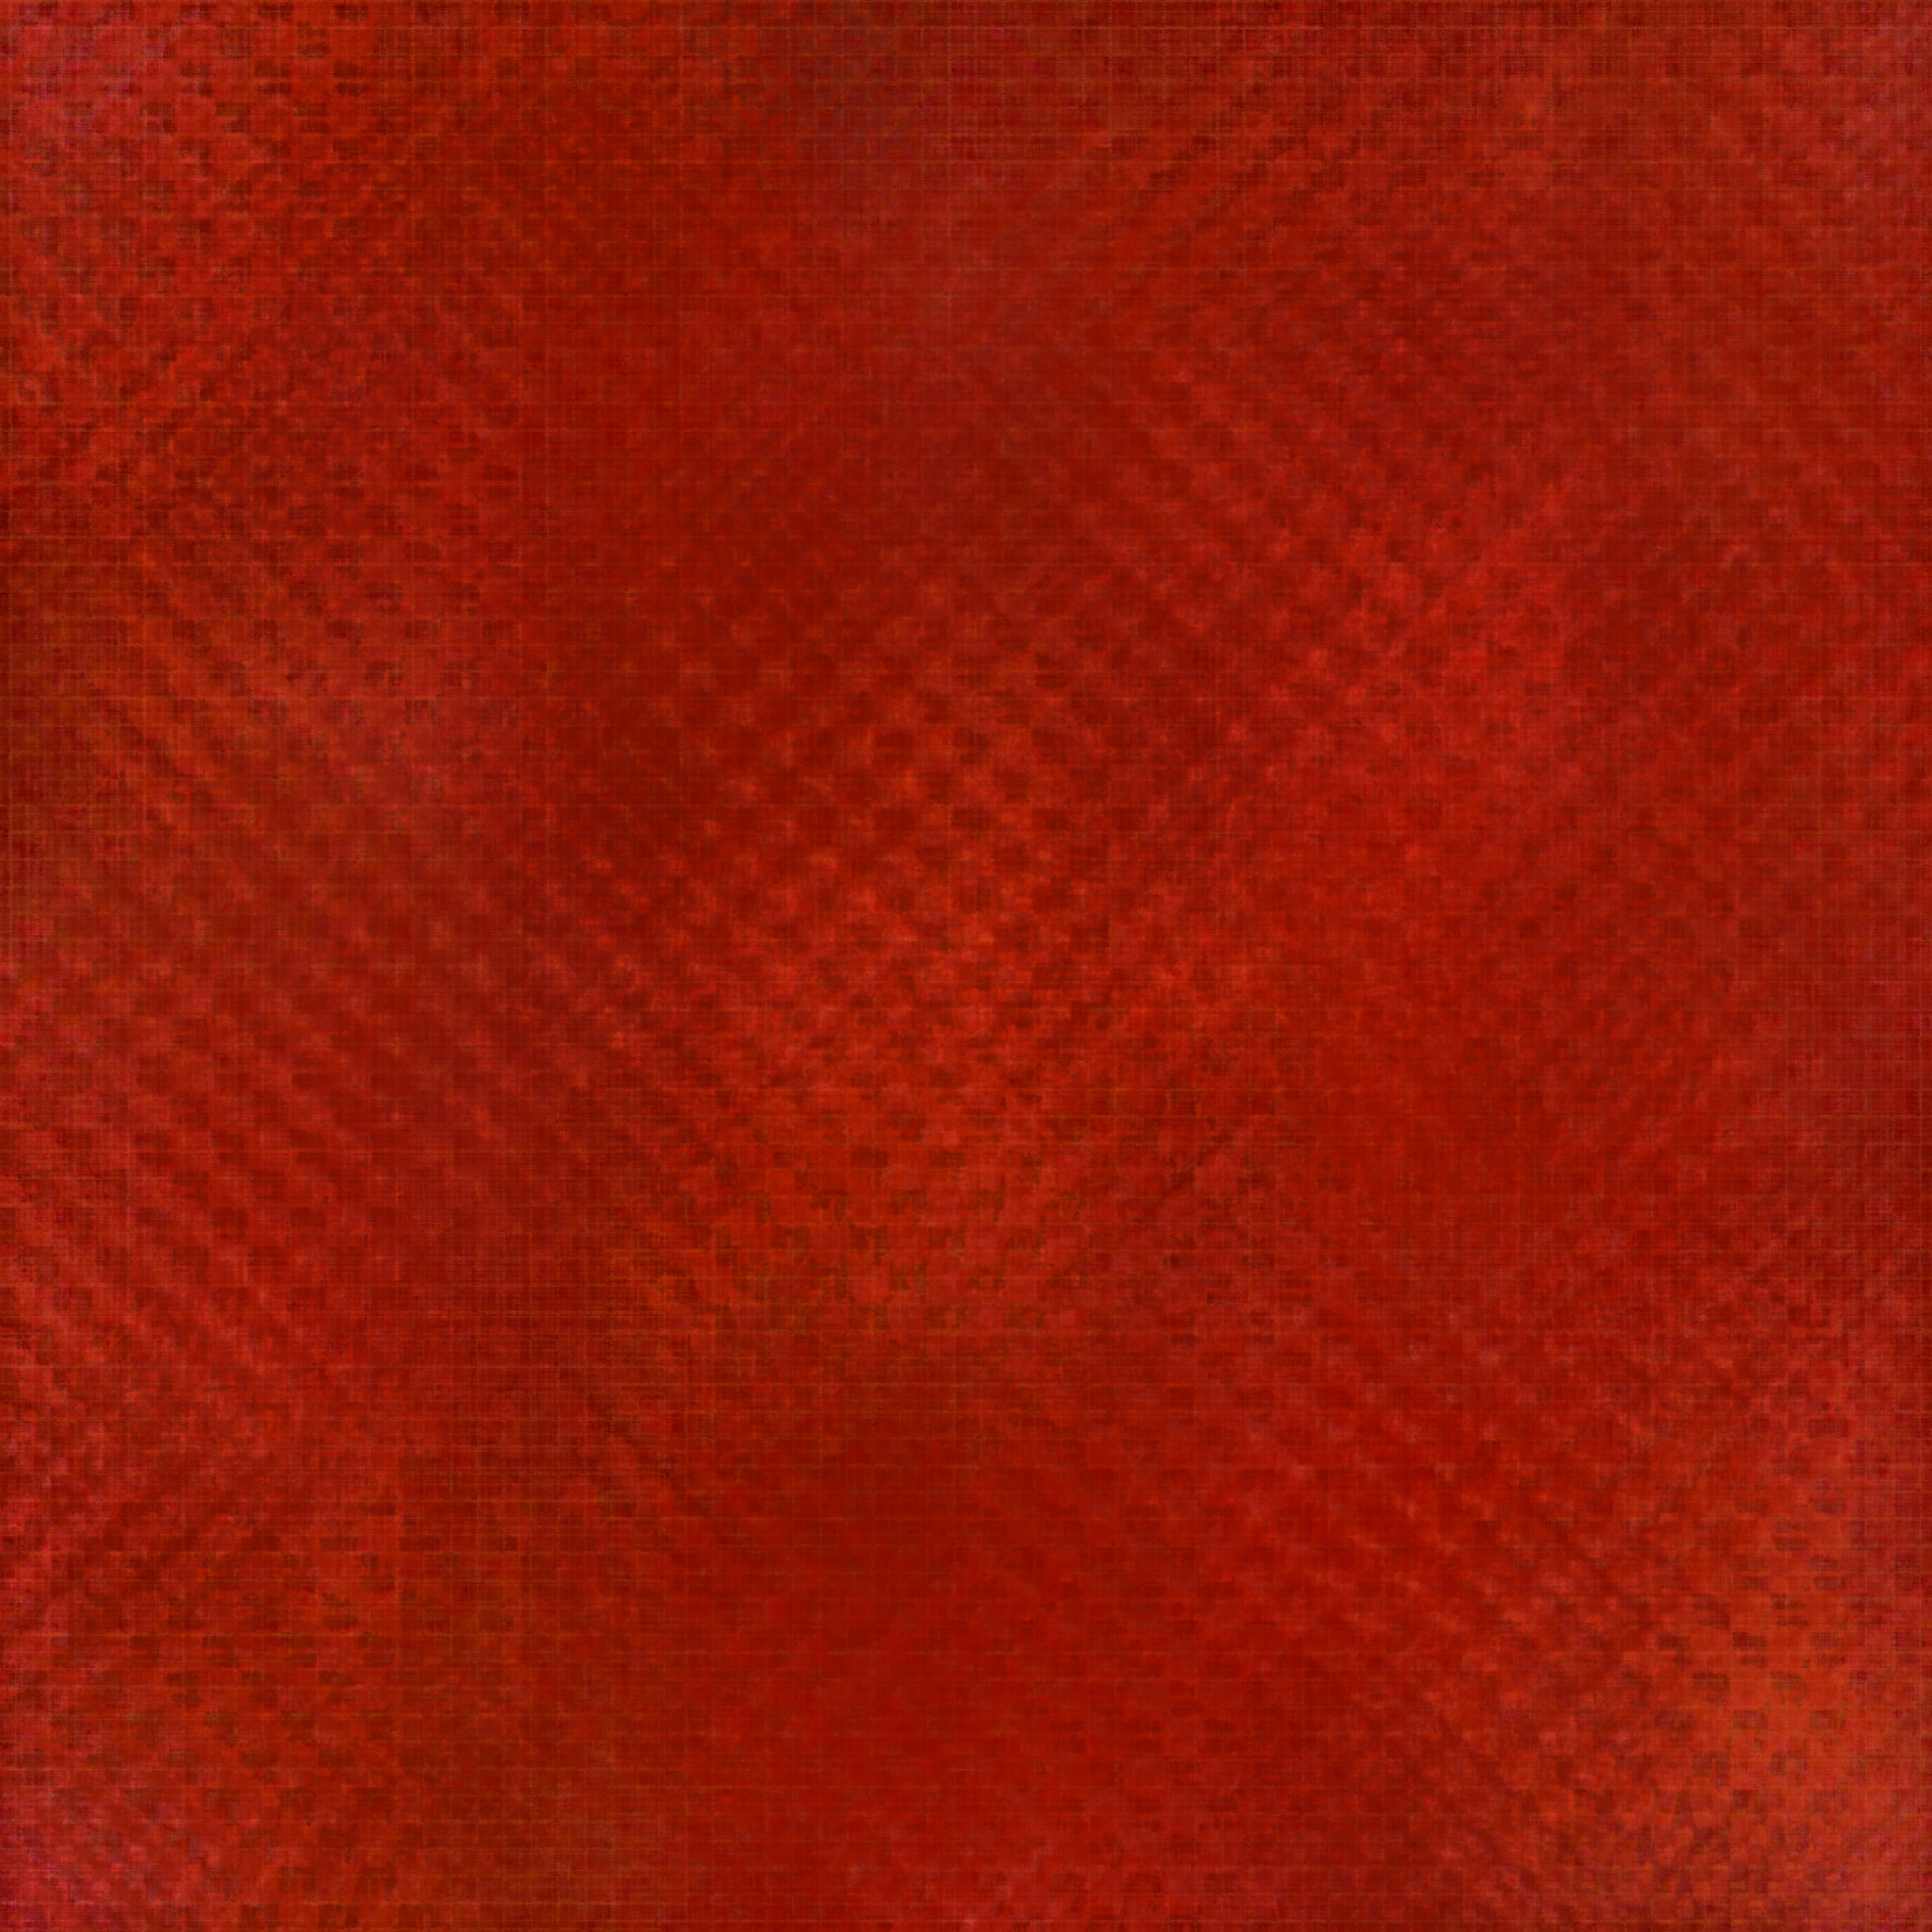 Red grunge texture background image, free download